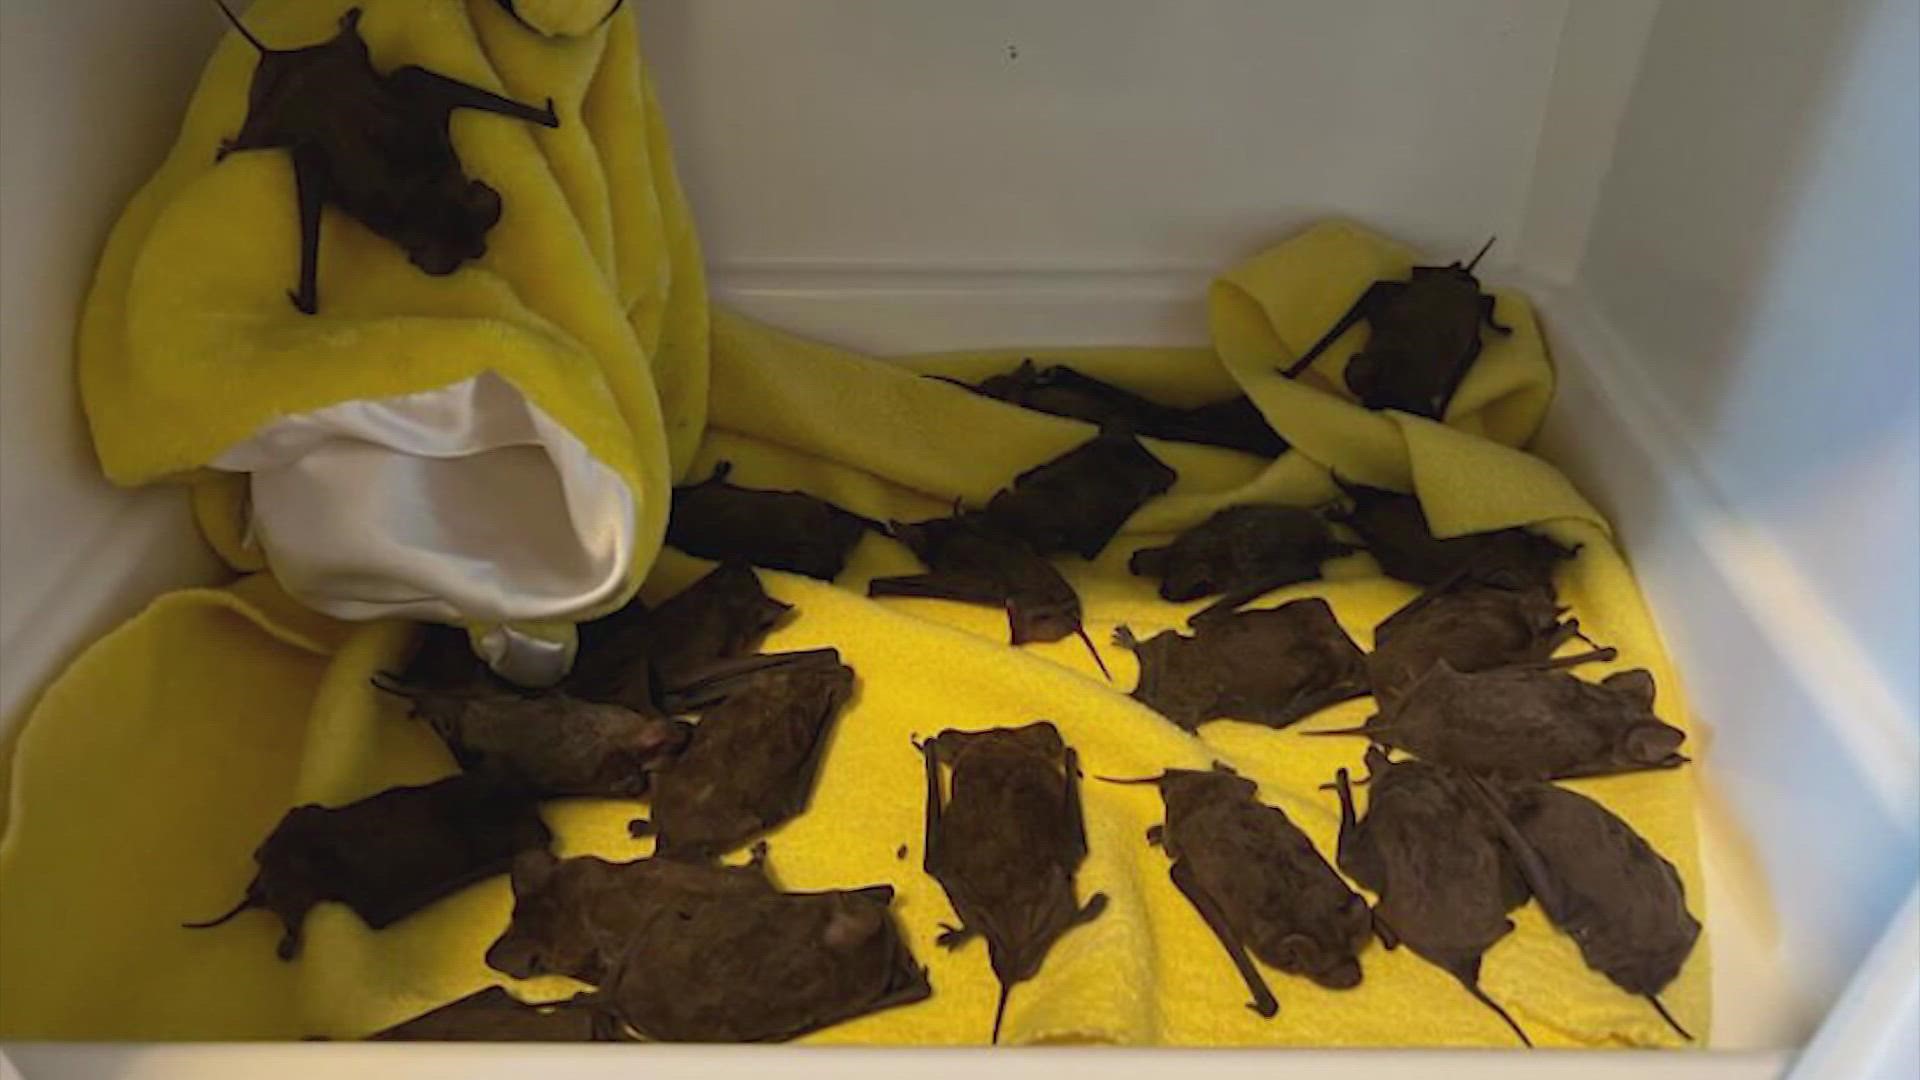 Experts with the Humane Society are working to "bat-proof" the area by adding rubber padding to soften their falls.